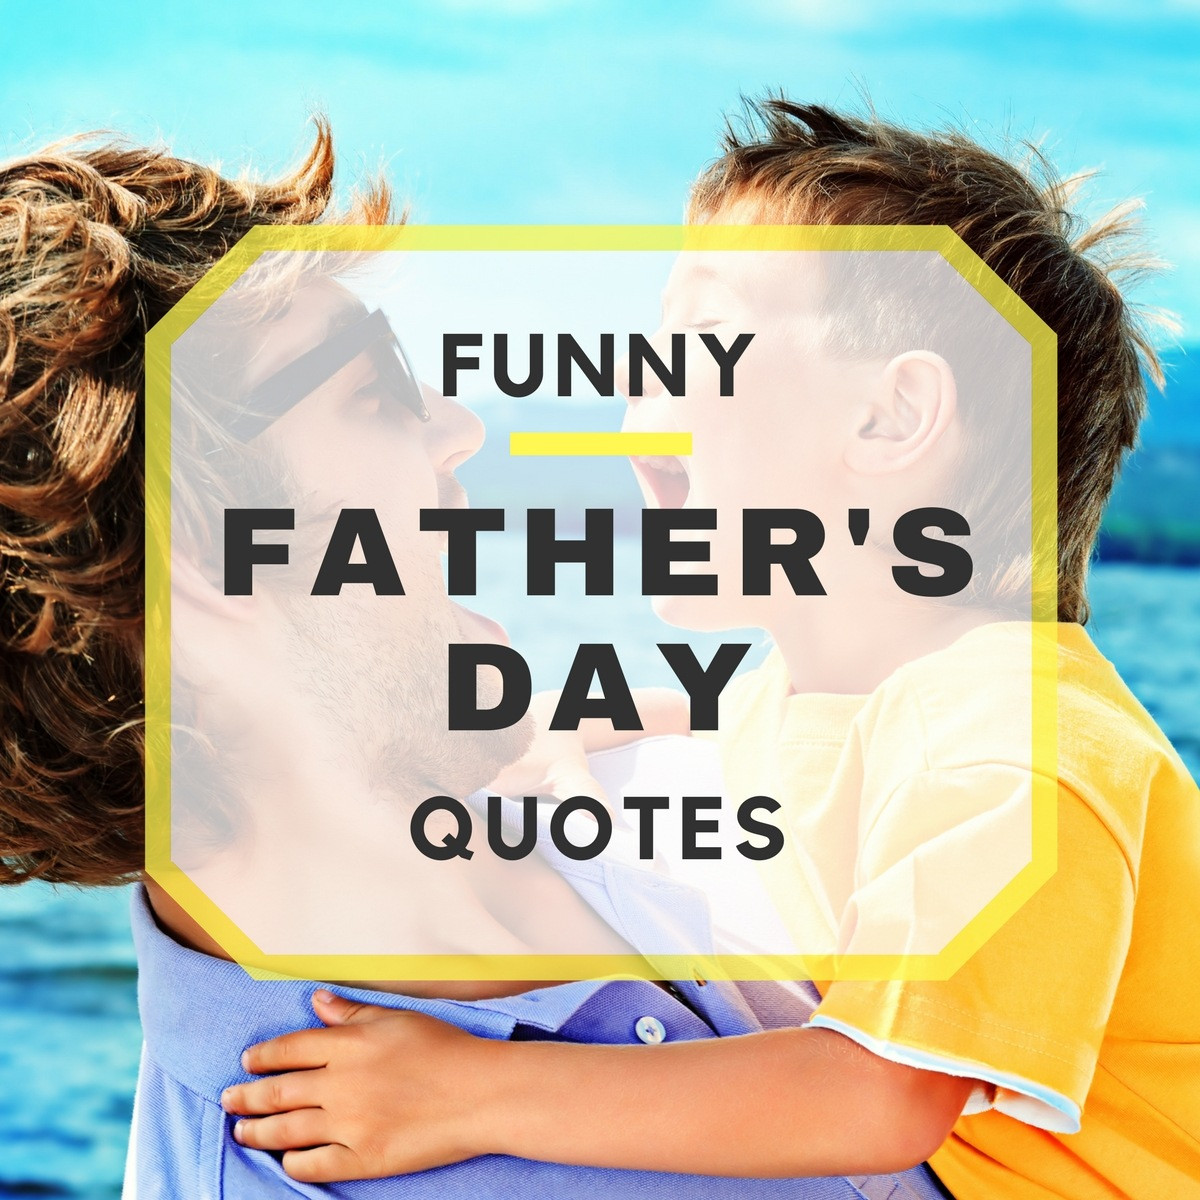 Funny Quotes About Fathers Day
 20 Funny Father s Day Quotes